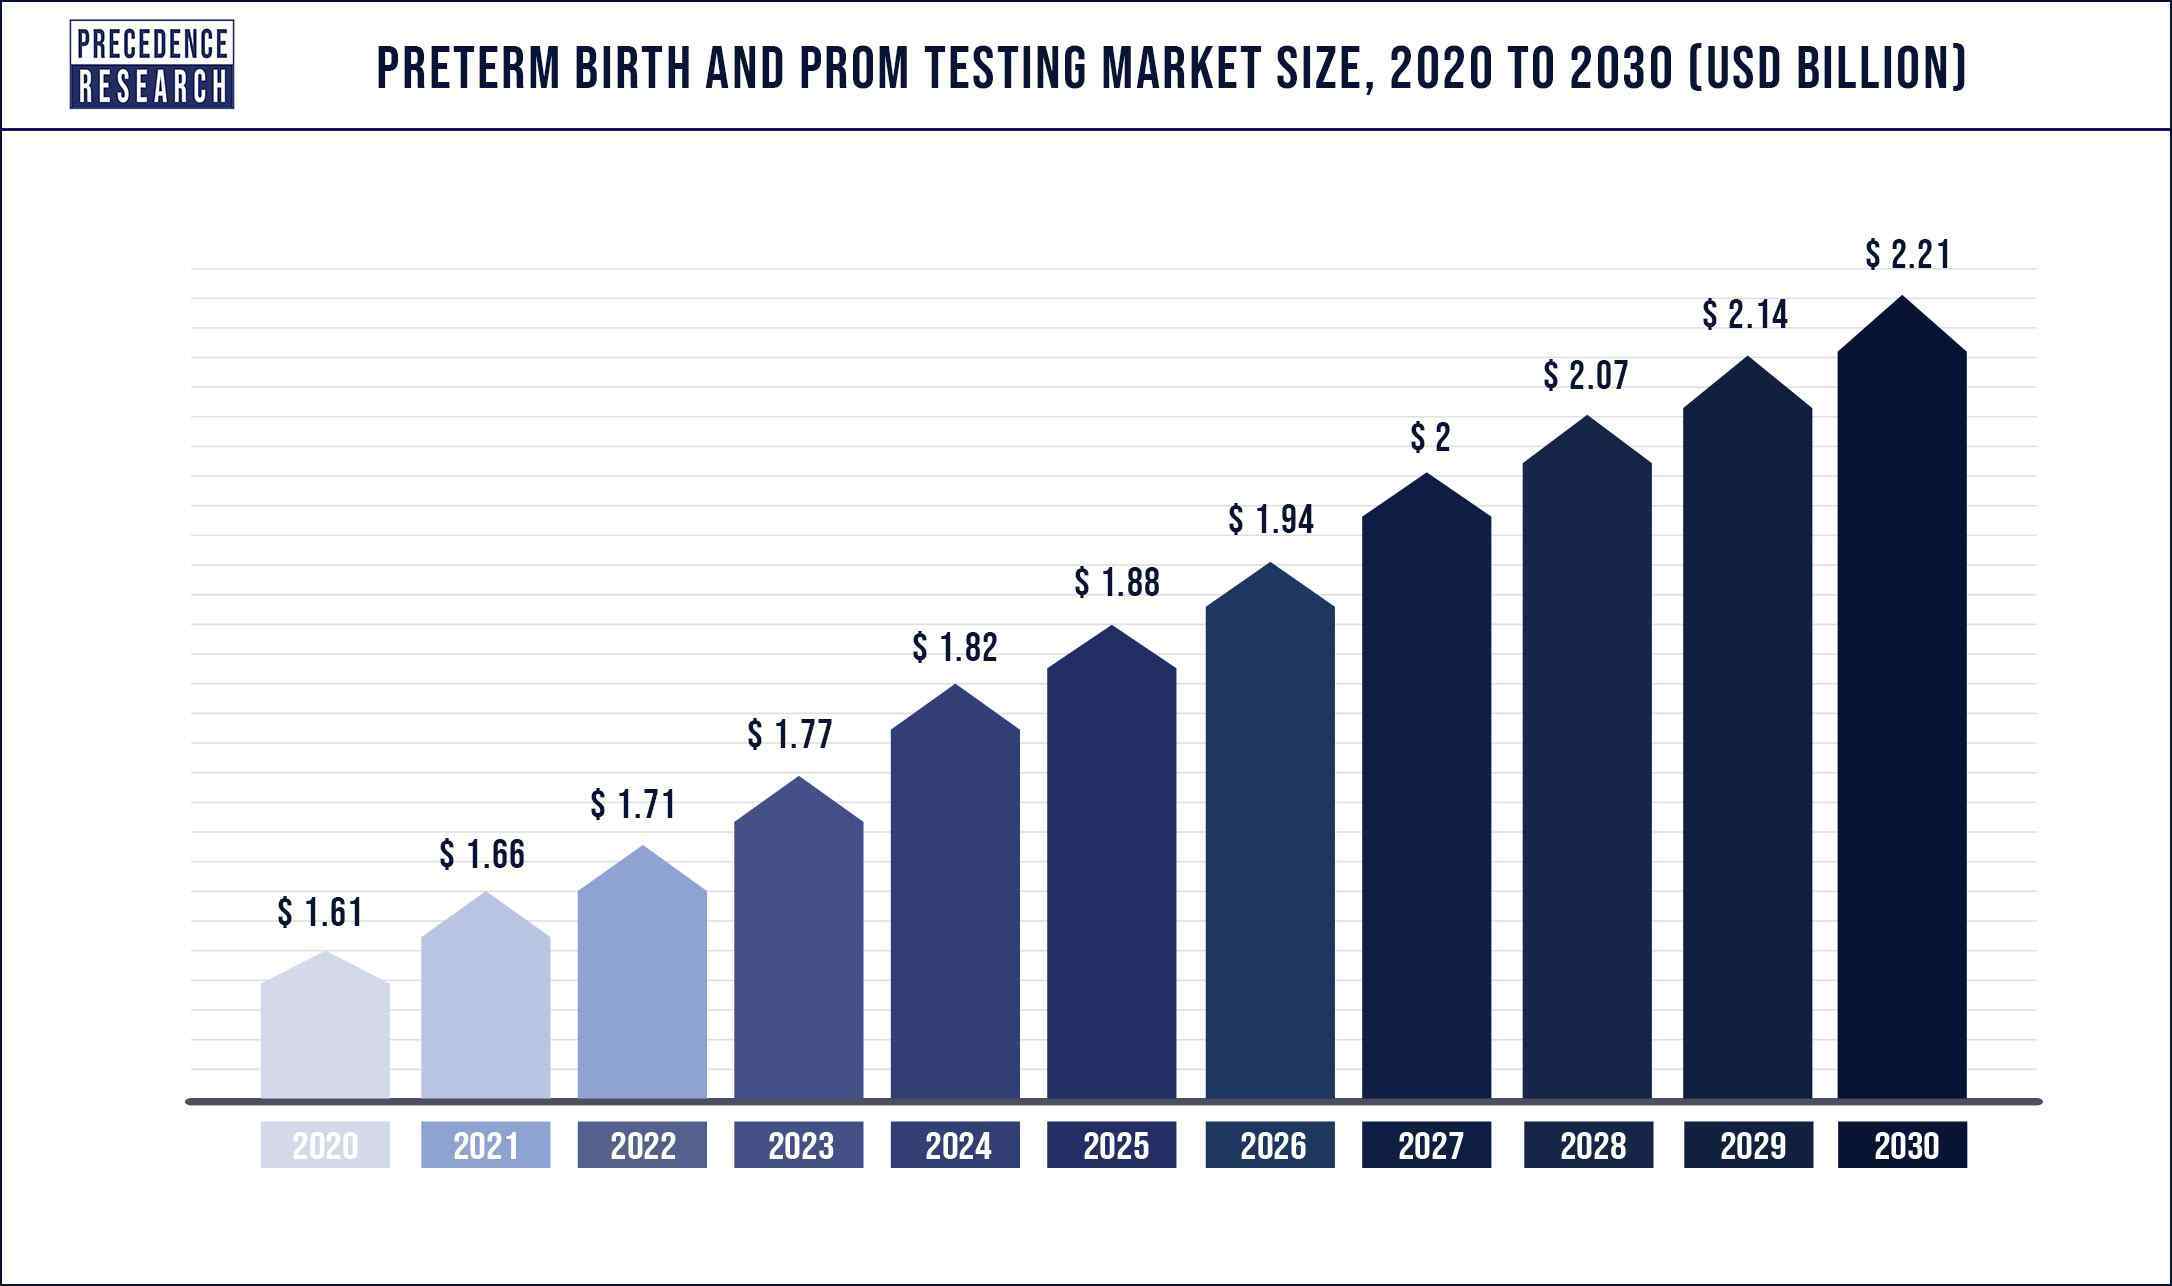 Preterm Birth and PROM Testing Market Size 2020 to 2030